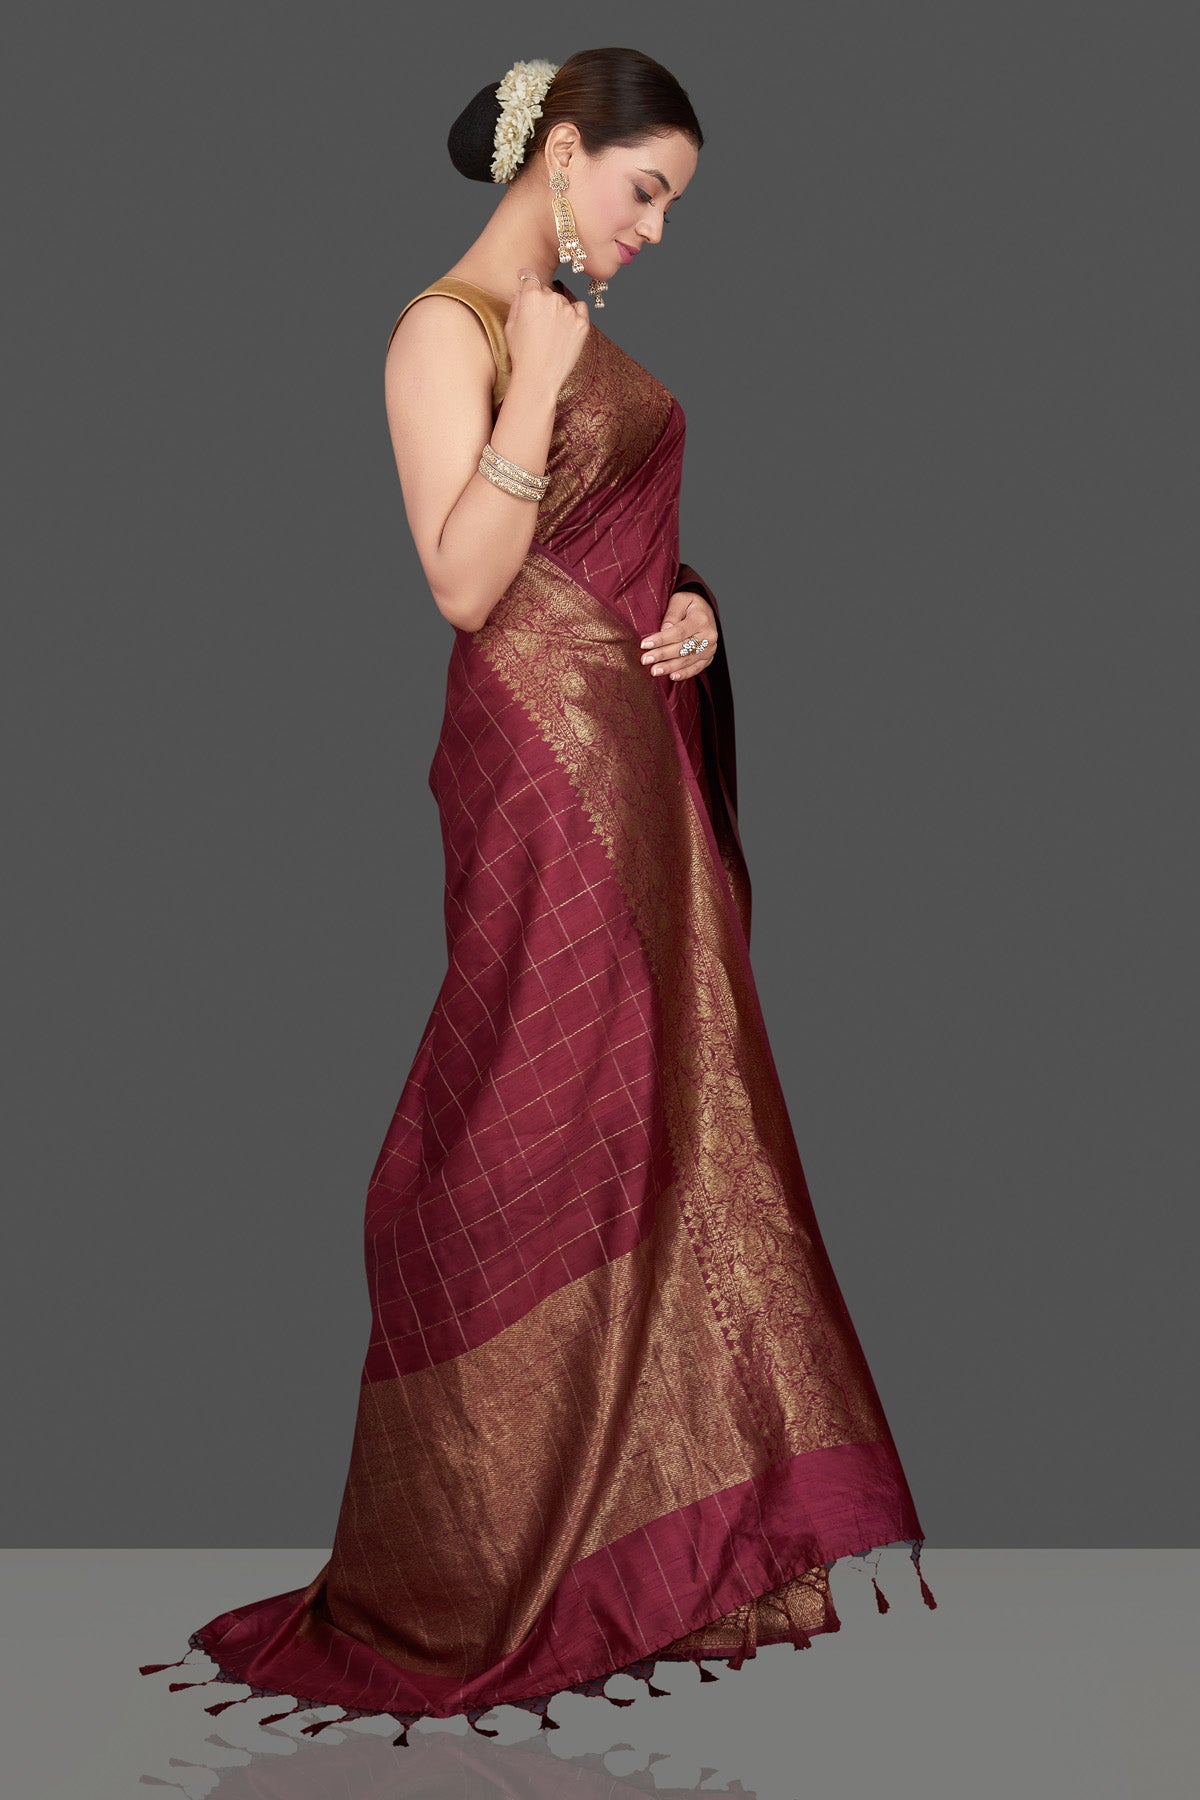 Buy gorgeous plum check tussar Banarasi saree online in USA with antique zari border. Go for stunning Indian designer sarees, georgette sarees, handwoven saris, embroidered sarees for festive occasions and weddings from Pure Elegance Indian clothing store in USA.-side